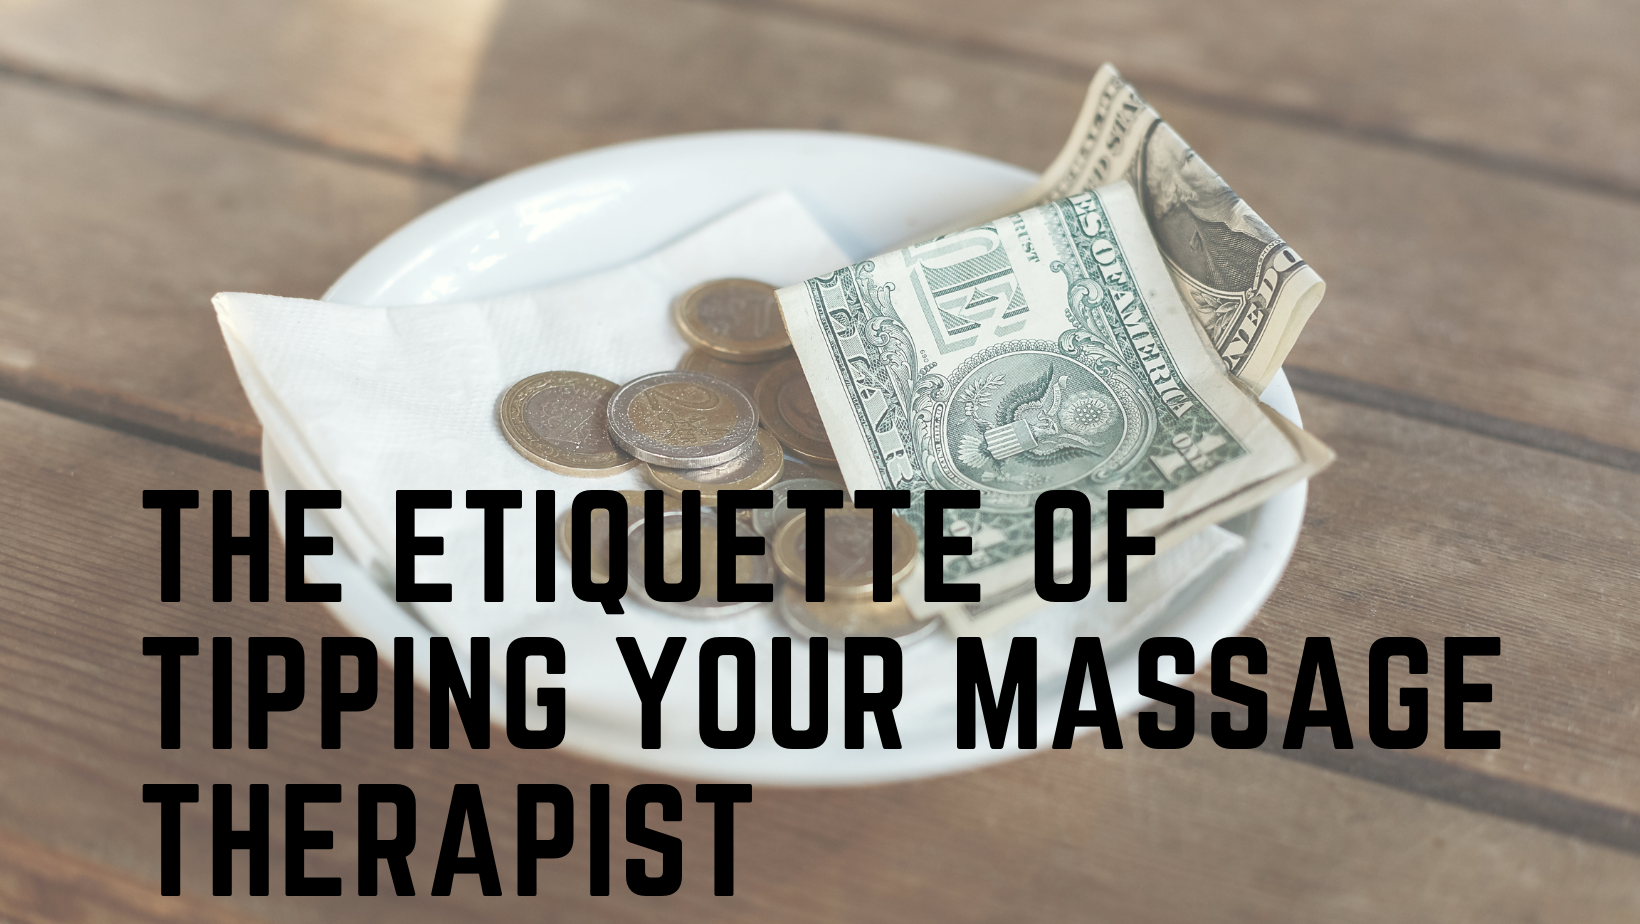 The Etiquette of Tipping Your Massage Therapist